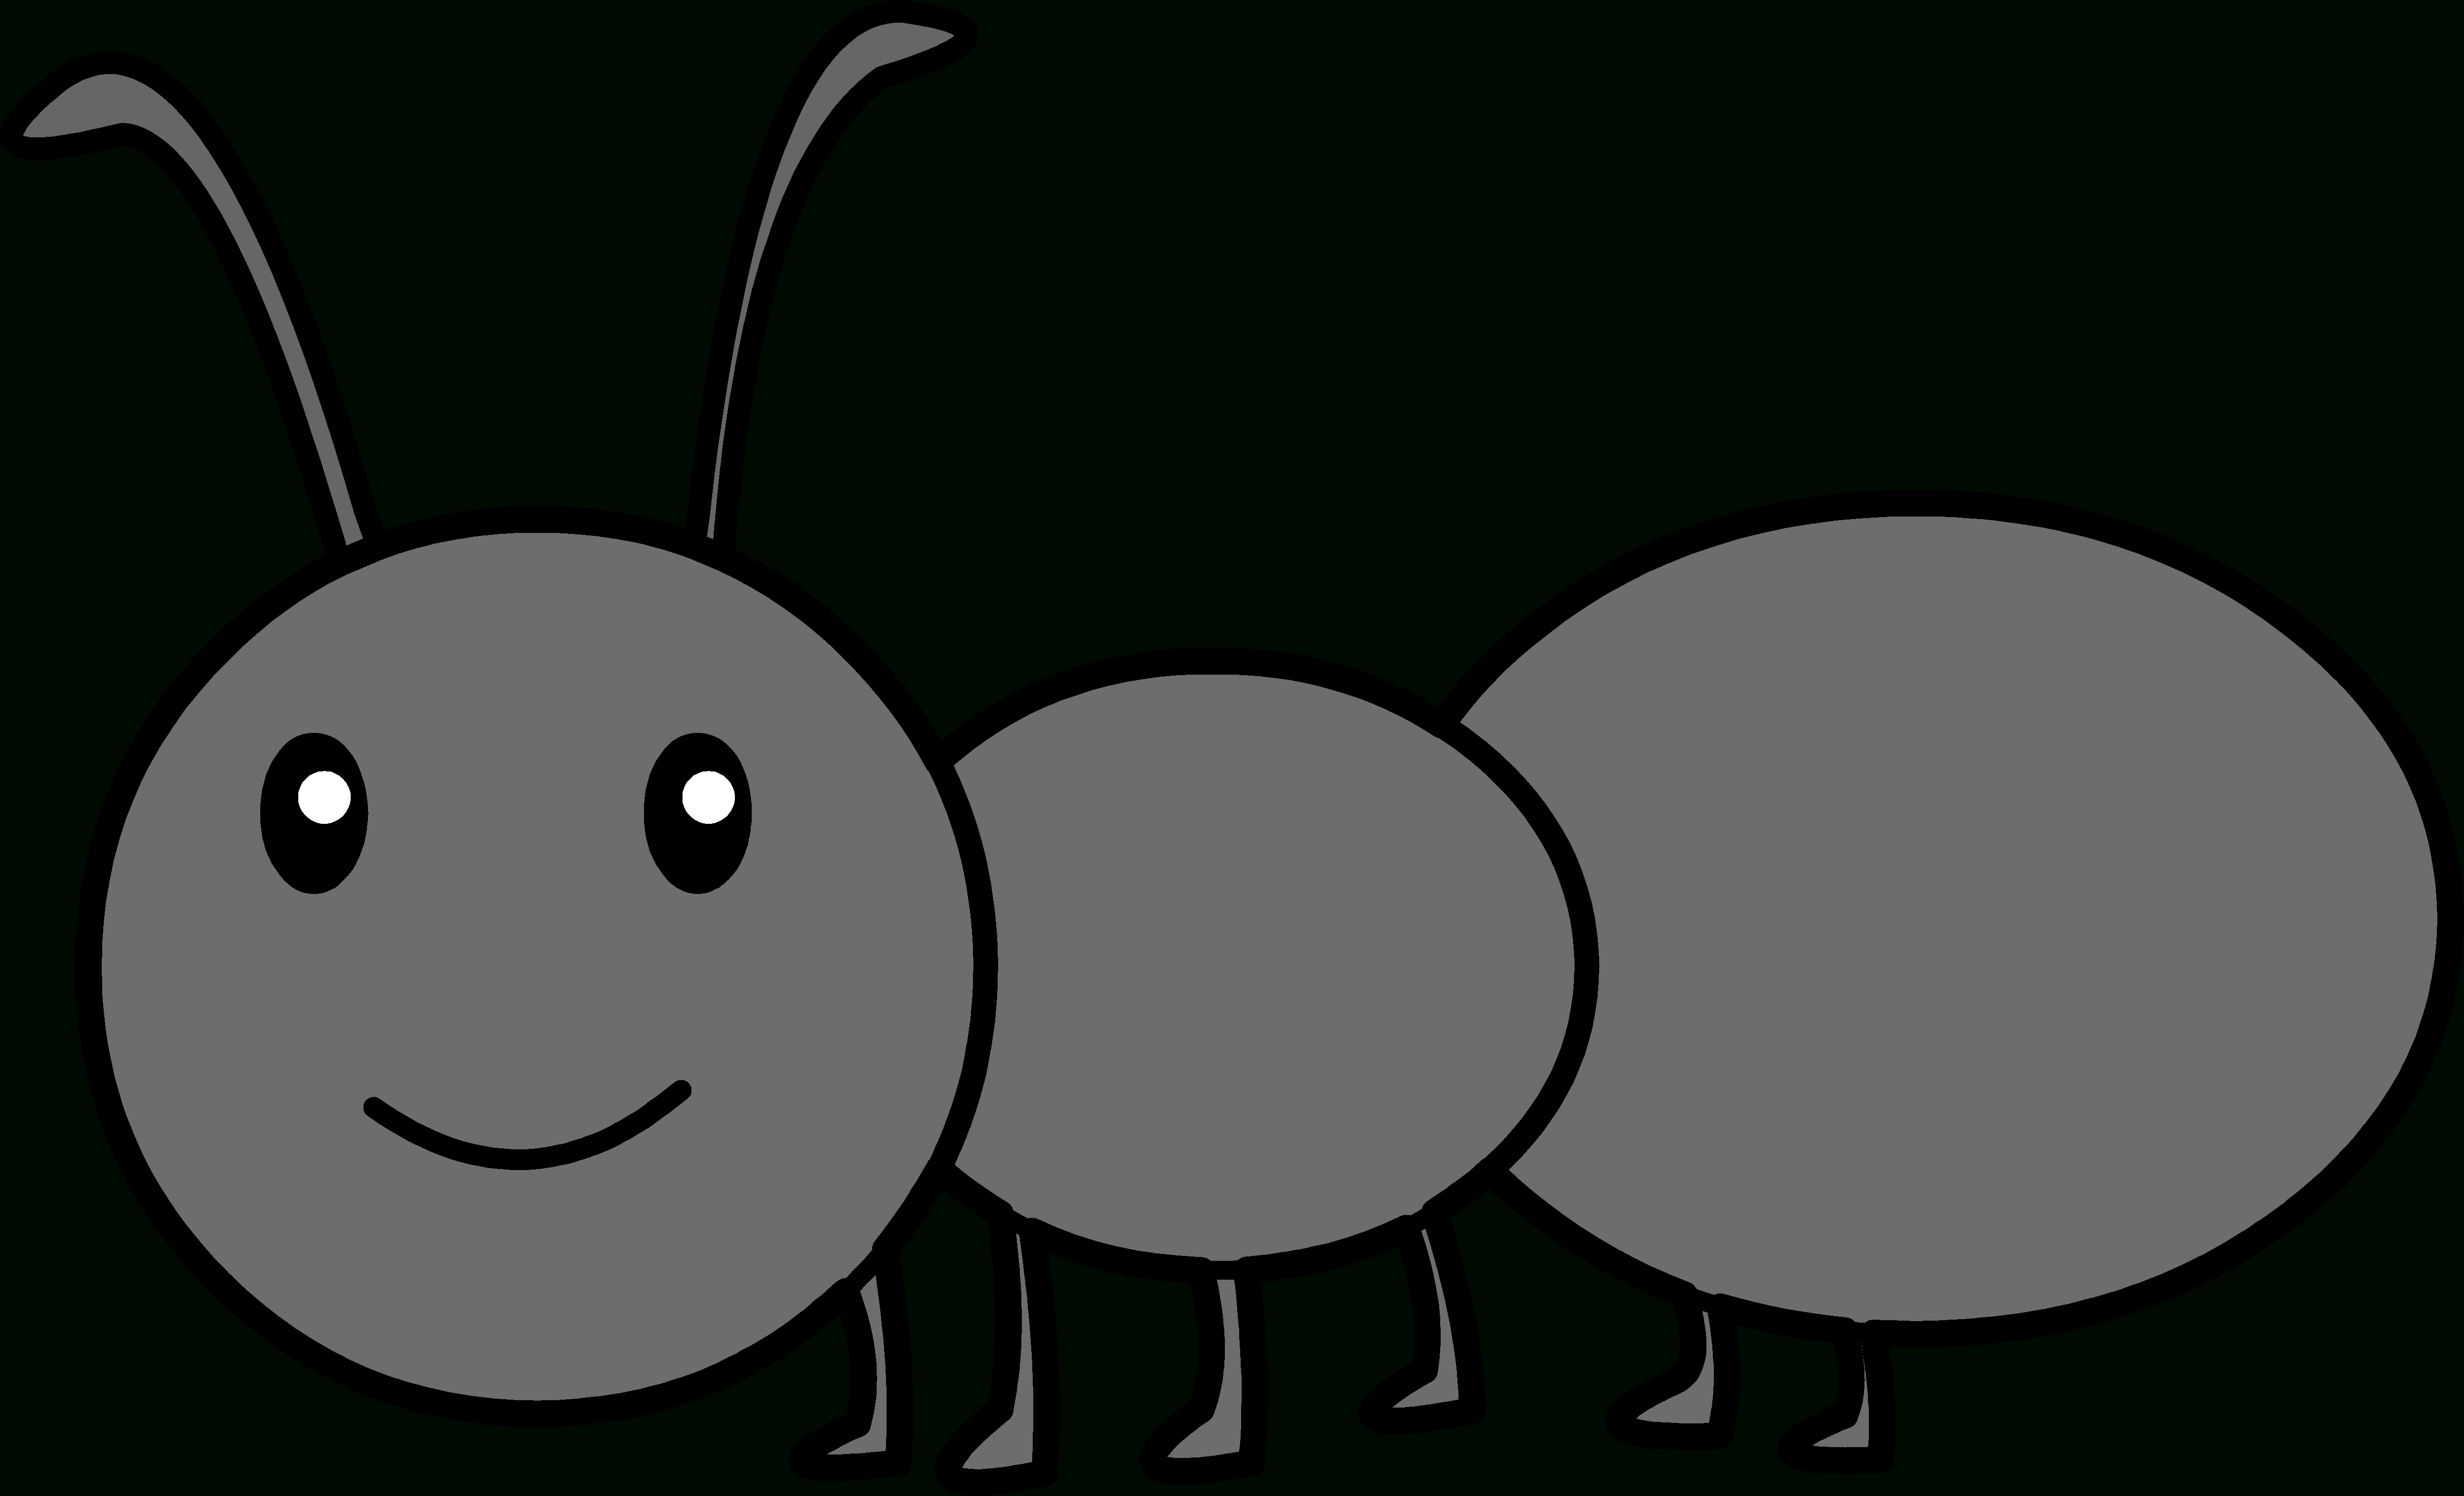 Ants clipart gray. Cute letters black ant